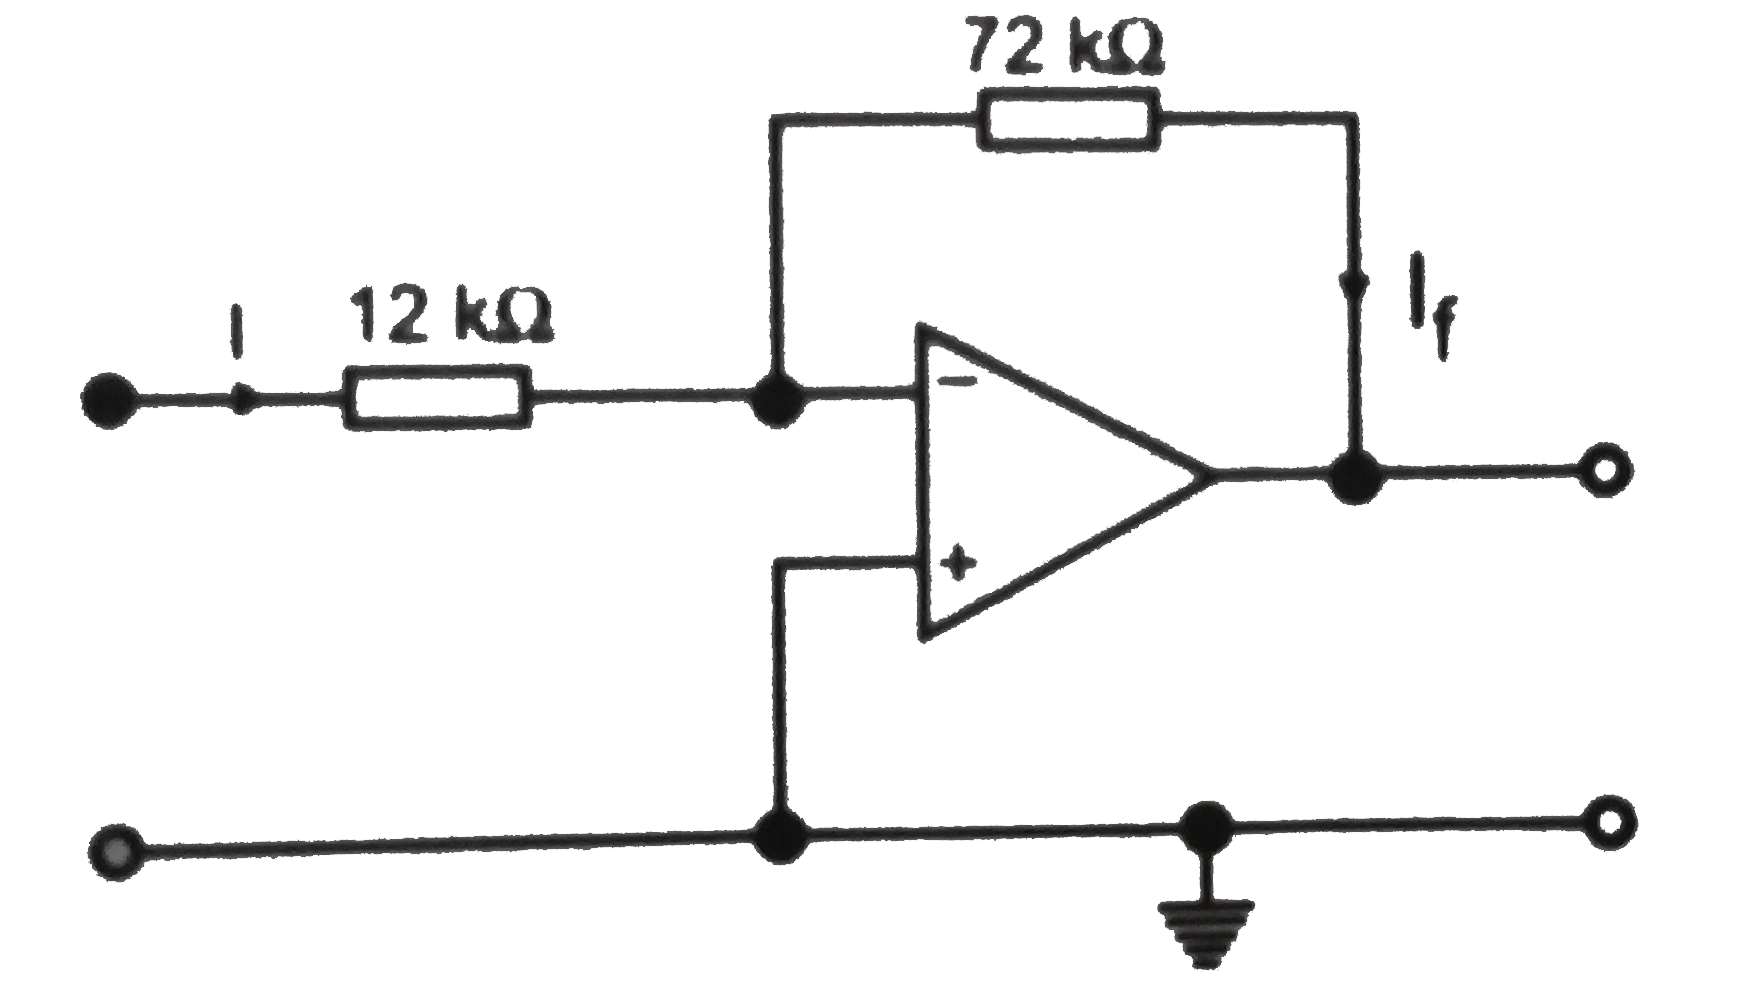 In the circuit shown in the diagram, the operational amplifier may be assumed to be ideal. The current in the 12 kOmega resistor is I.      What is the current I(f) in the 72 k Omega resistor?